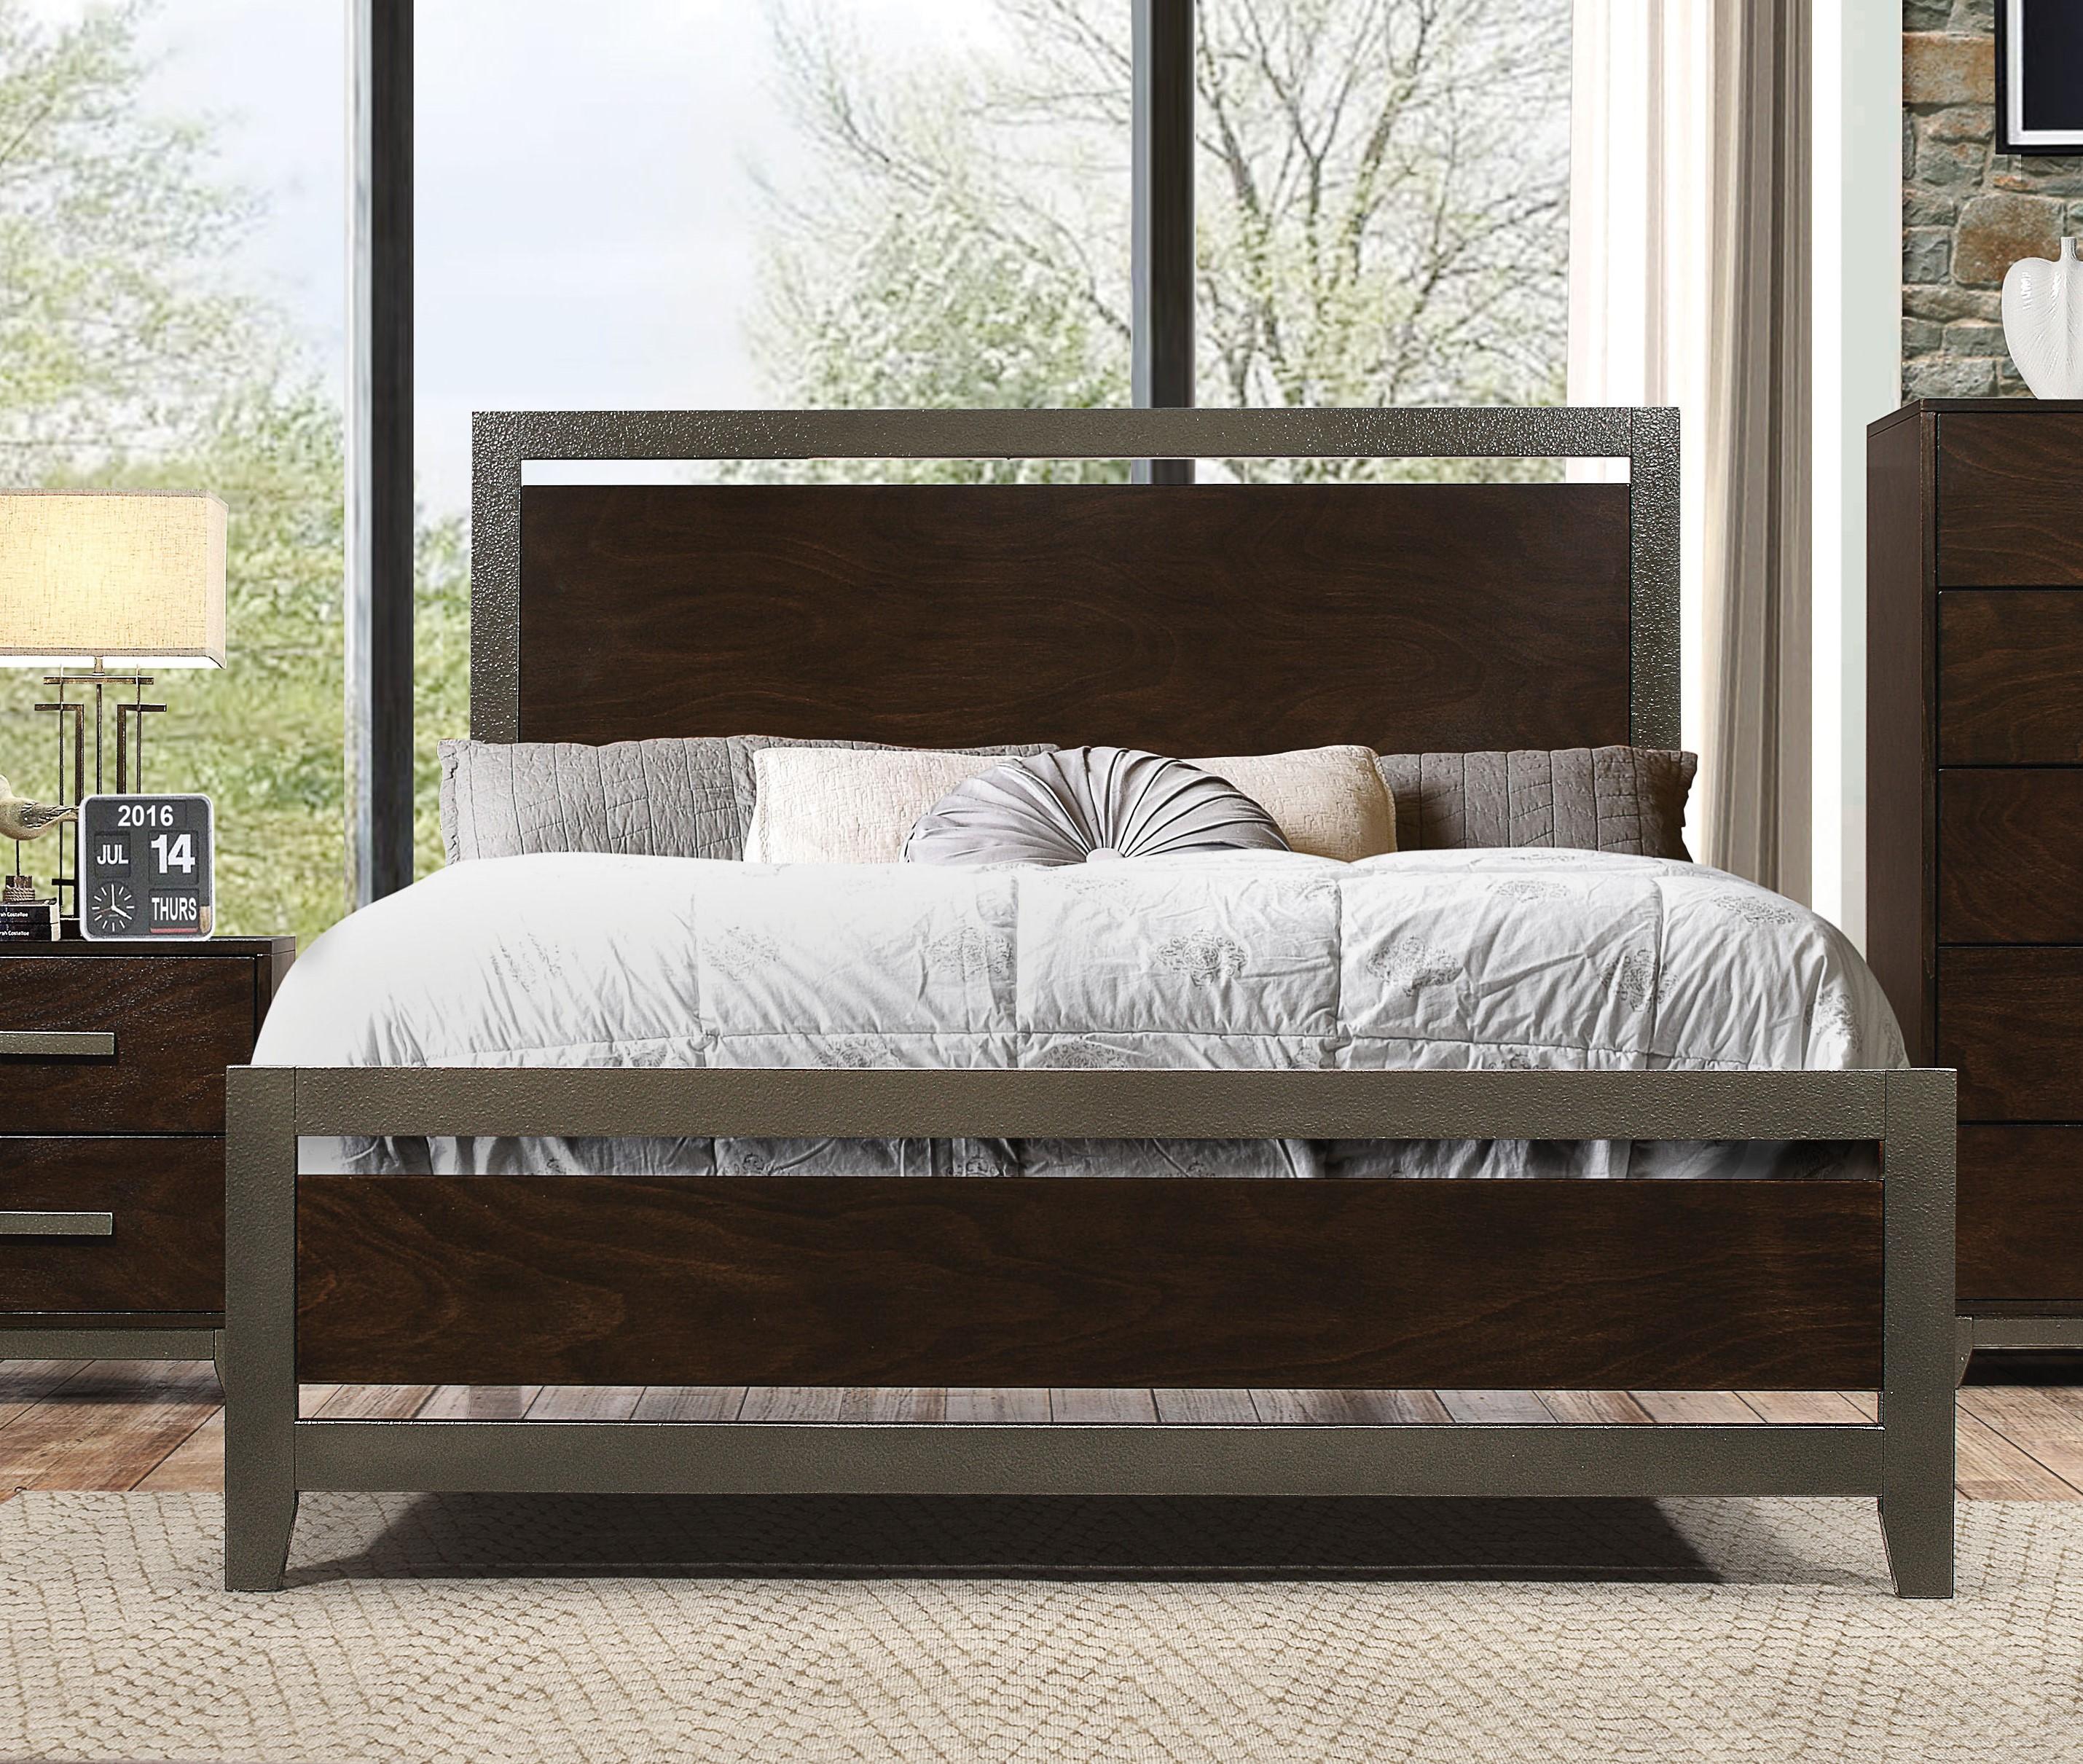 Transitional Panel Bed Charleen-26680Q 26680Q in Walnut Lacquer